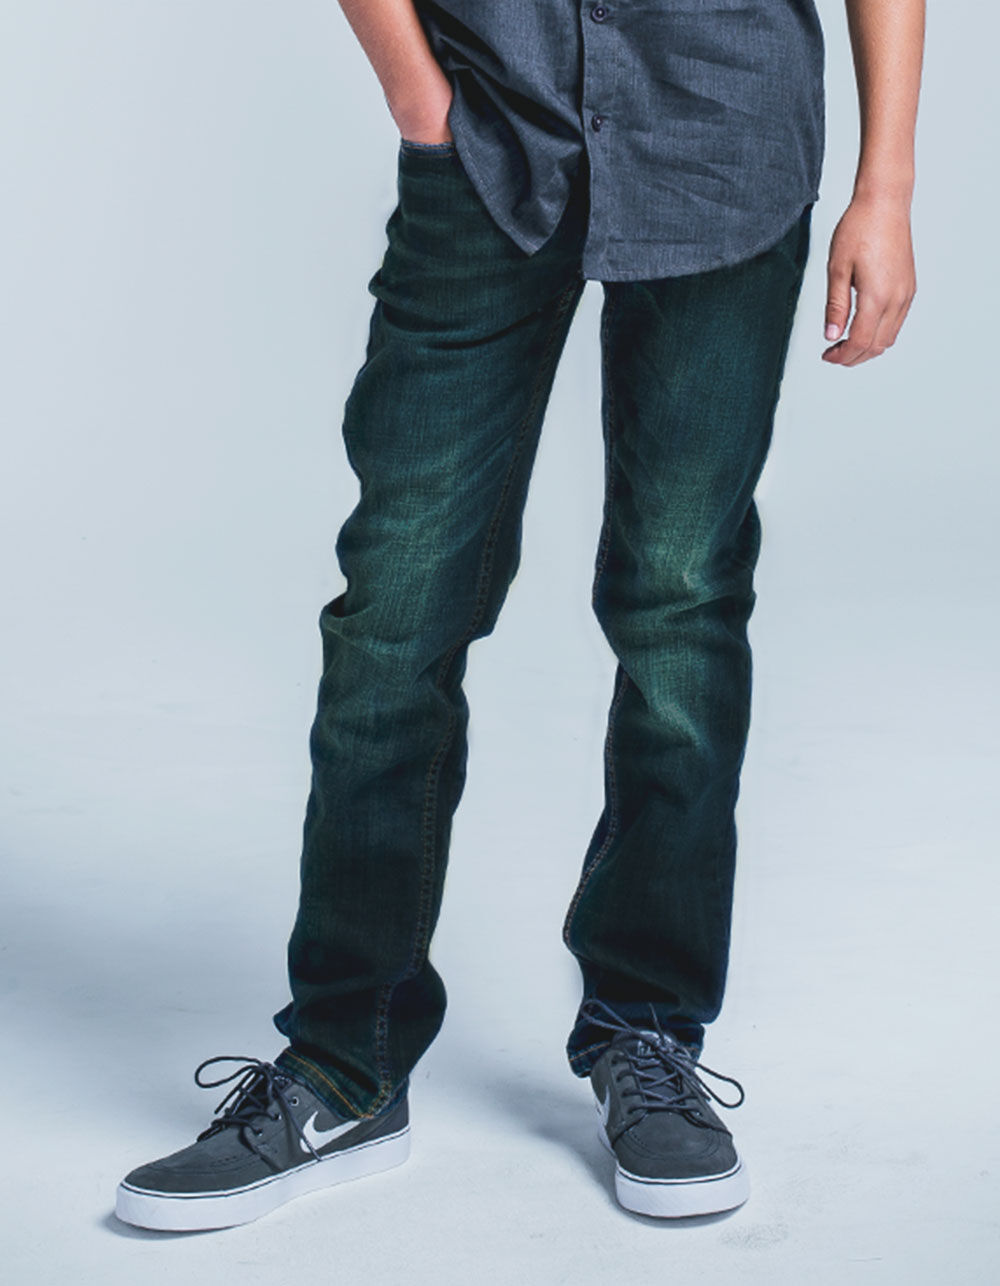 RSQ London Boys Skinny Jeans image number 2